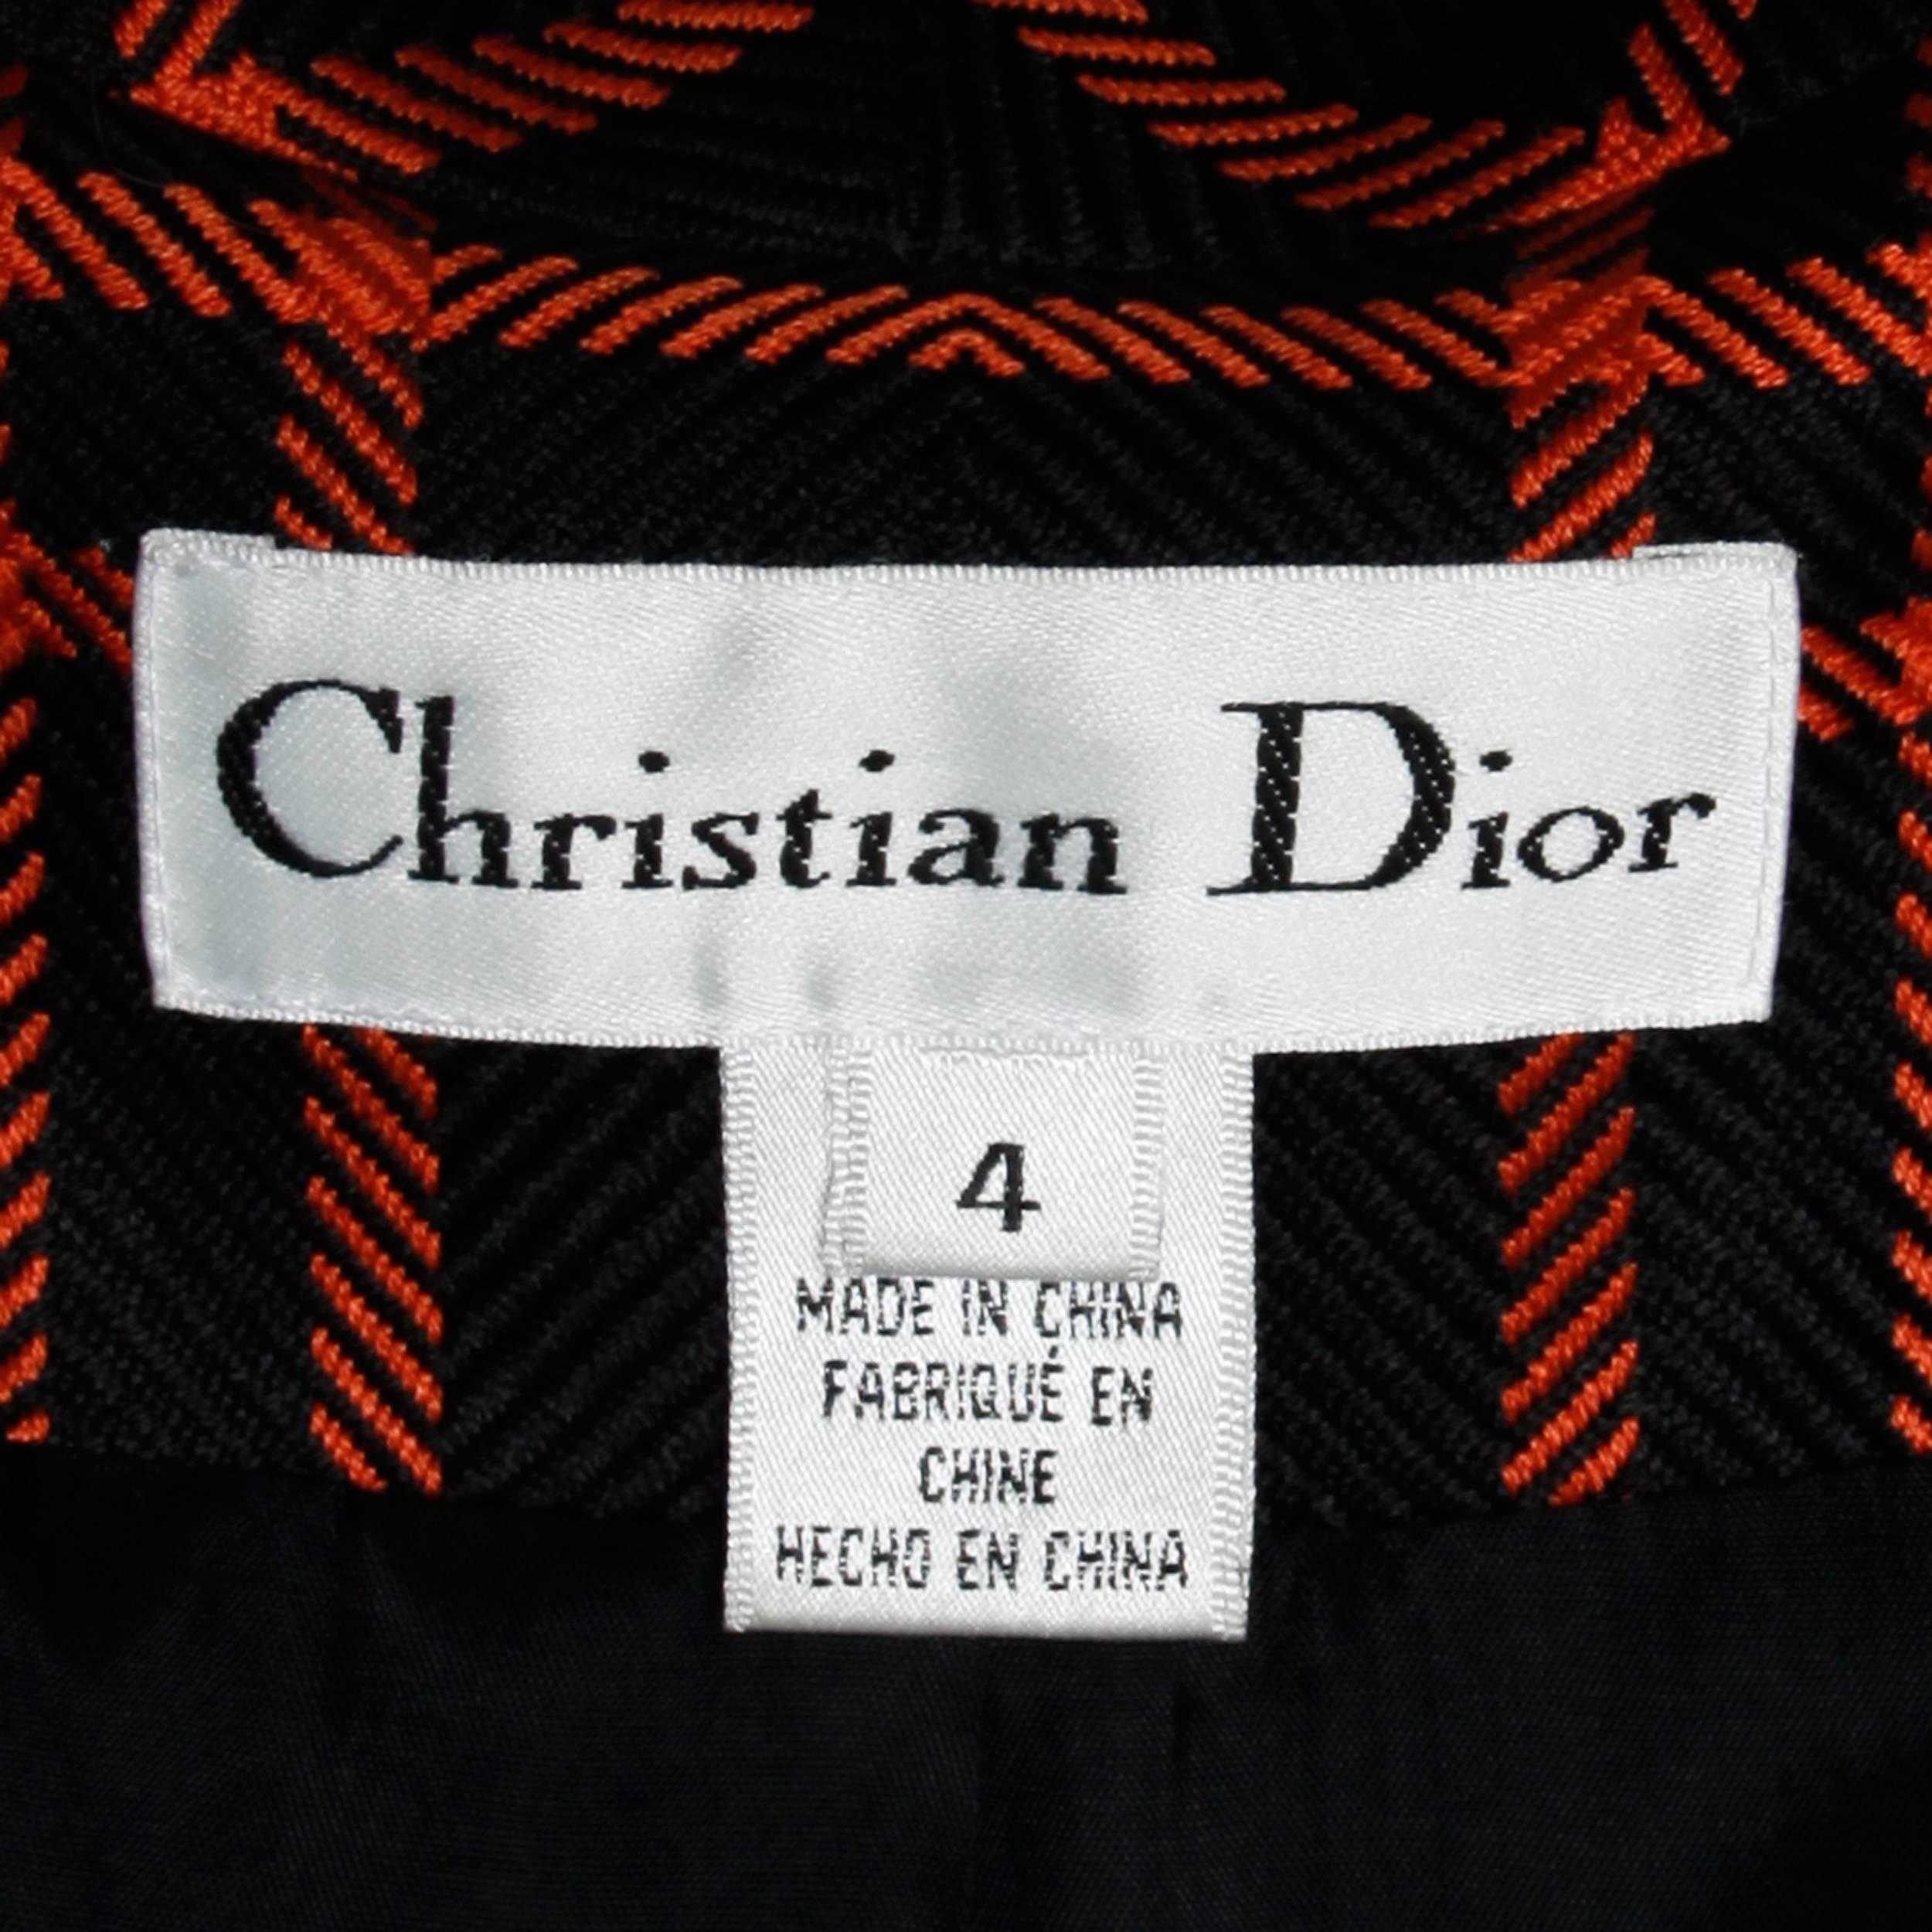 Chic orange and black plaid blazer jacket by Christian Dior.

Details:

Fully Lined
Front Button Closure
Marked Size: 4
Estimated Size: Small
Color: Orange/ Black
Fabric: 100% Silk/ 100% Acetate
Label: Christian